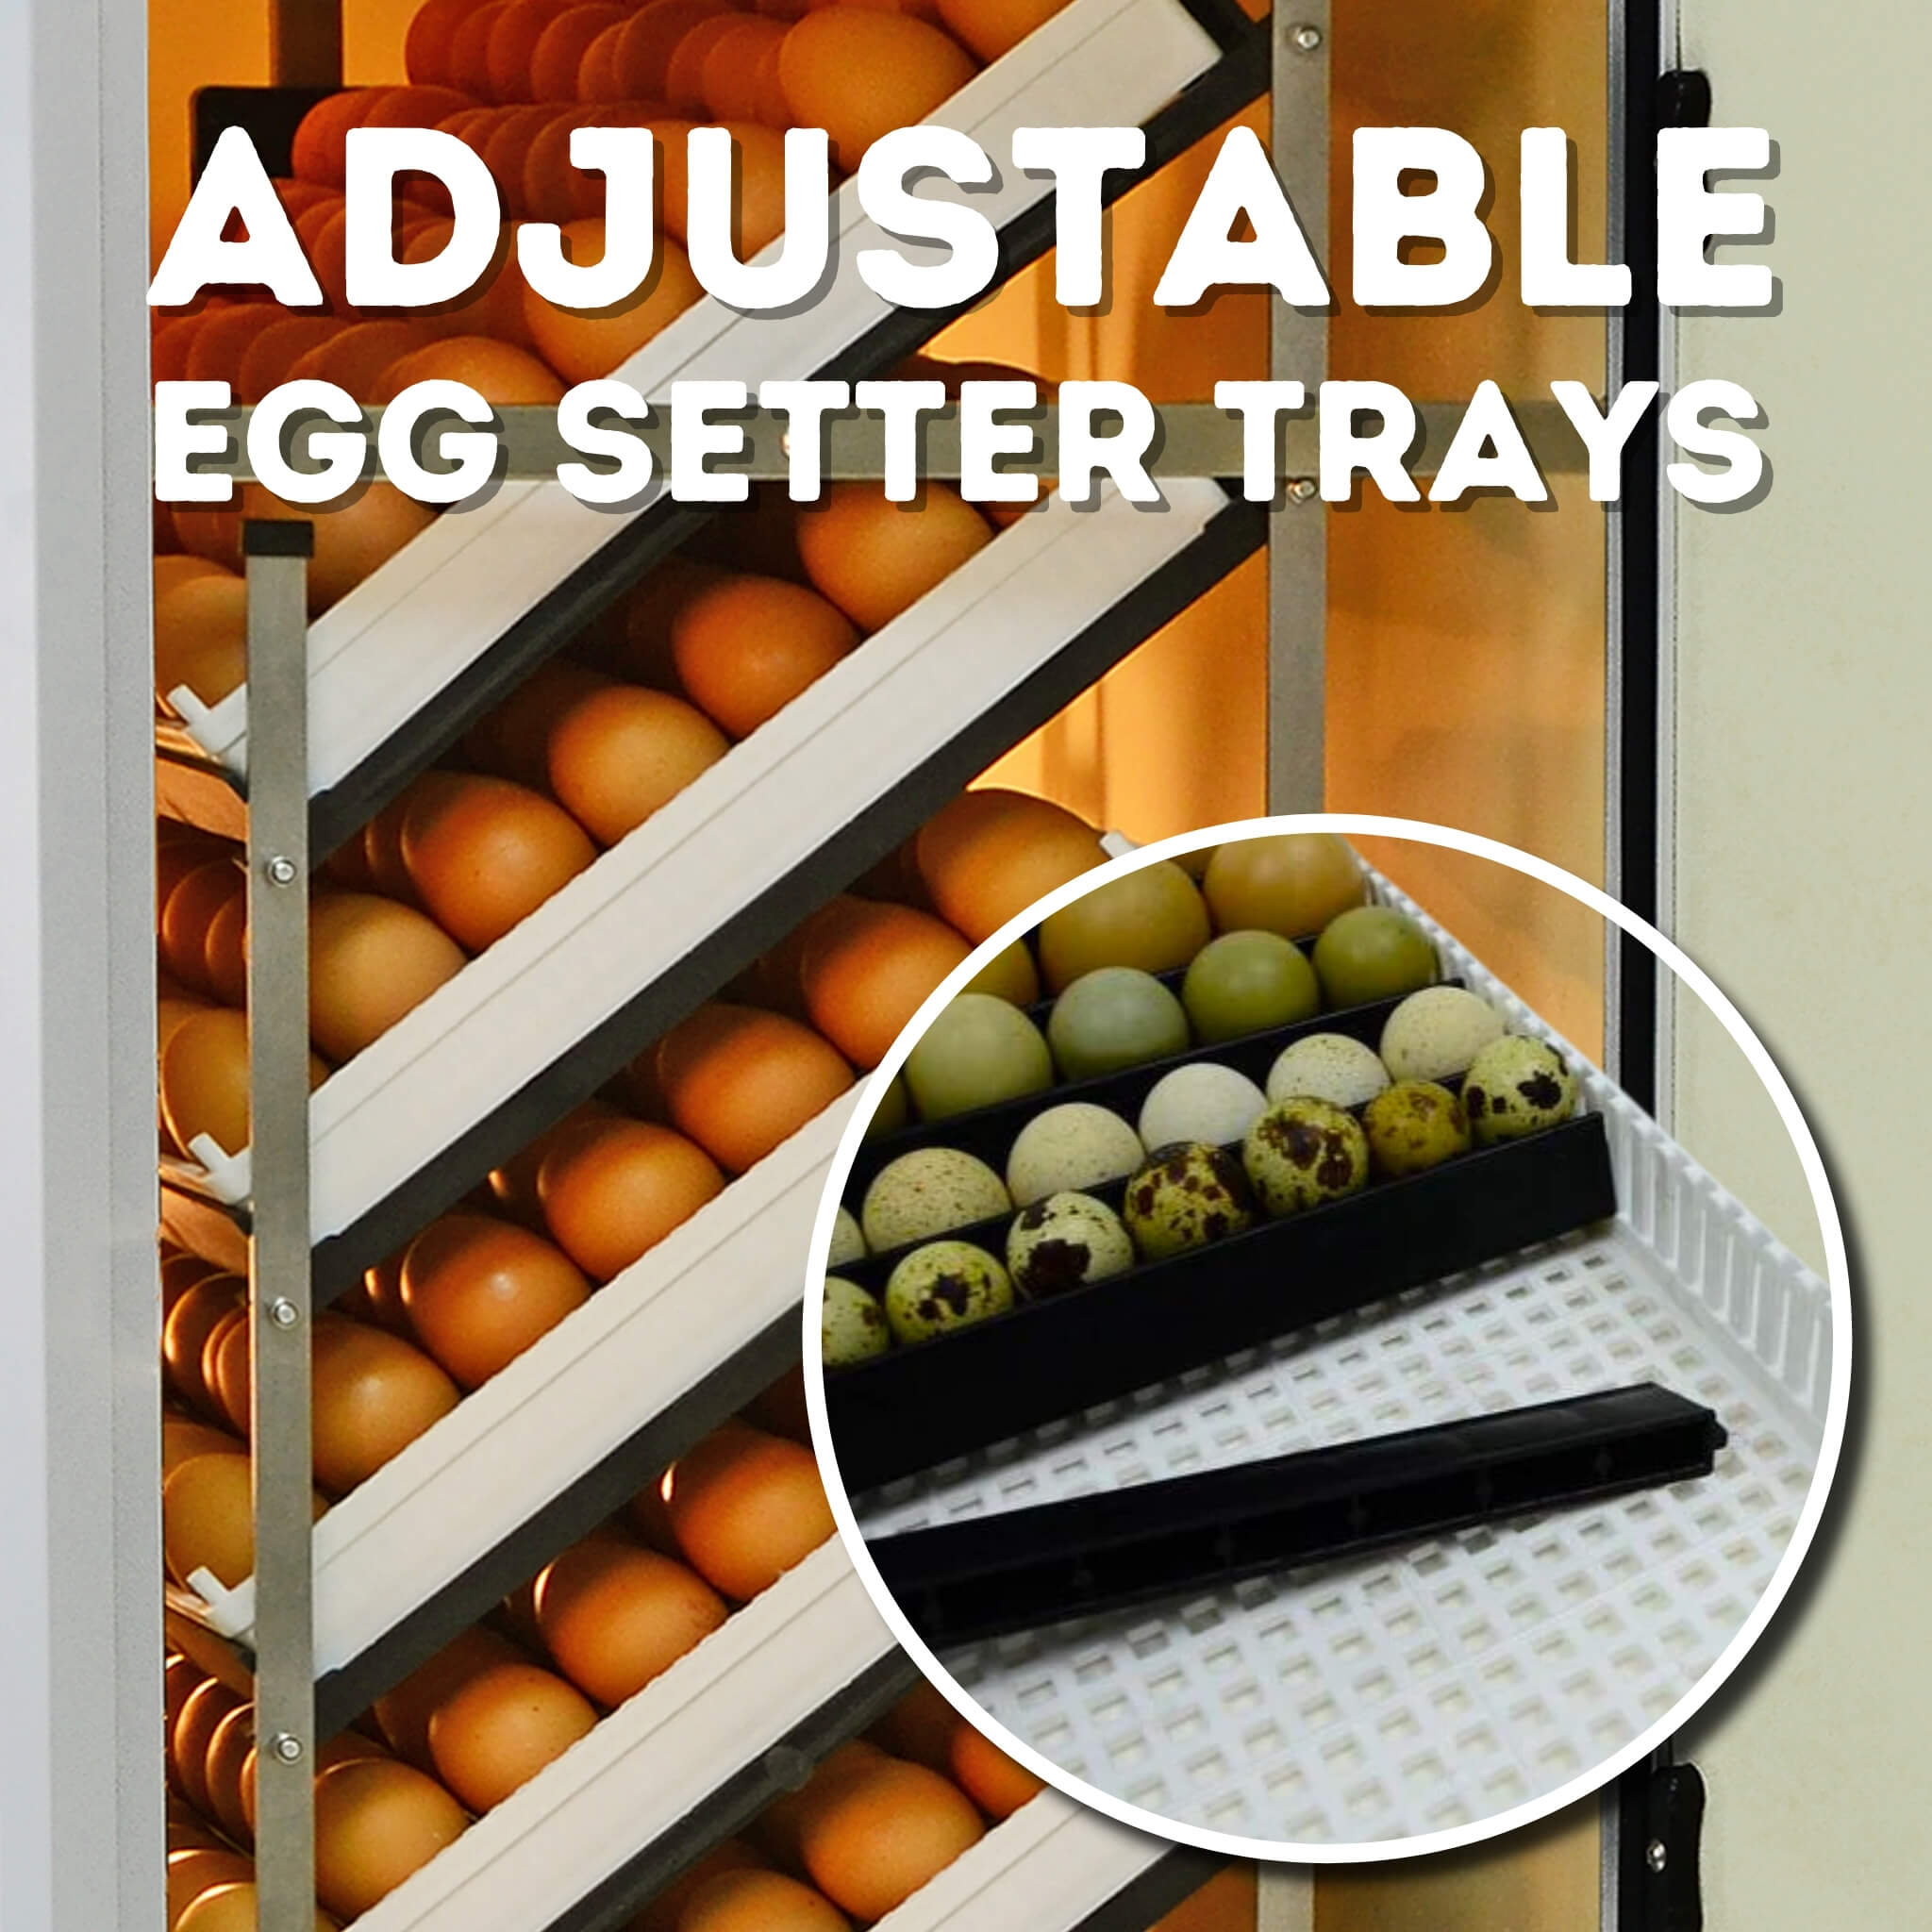 Hatching Time Cimuka. Close-up of adjustable egg setter trays in Cimuka HB500S, showcasing customizability for different egg sizes, an innovative feature for poultry breeders.